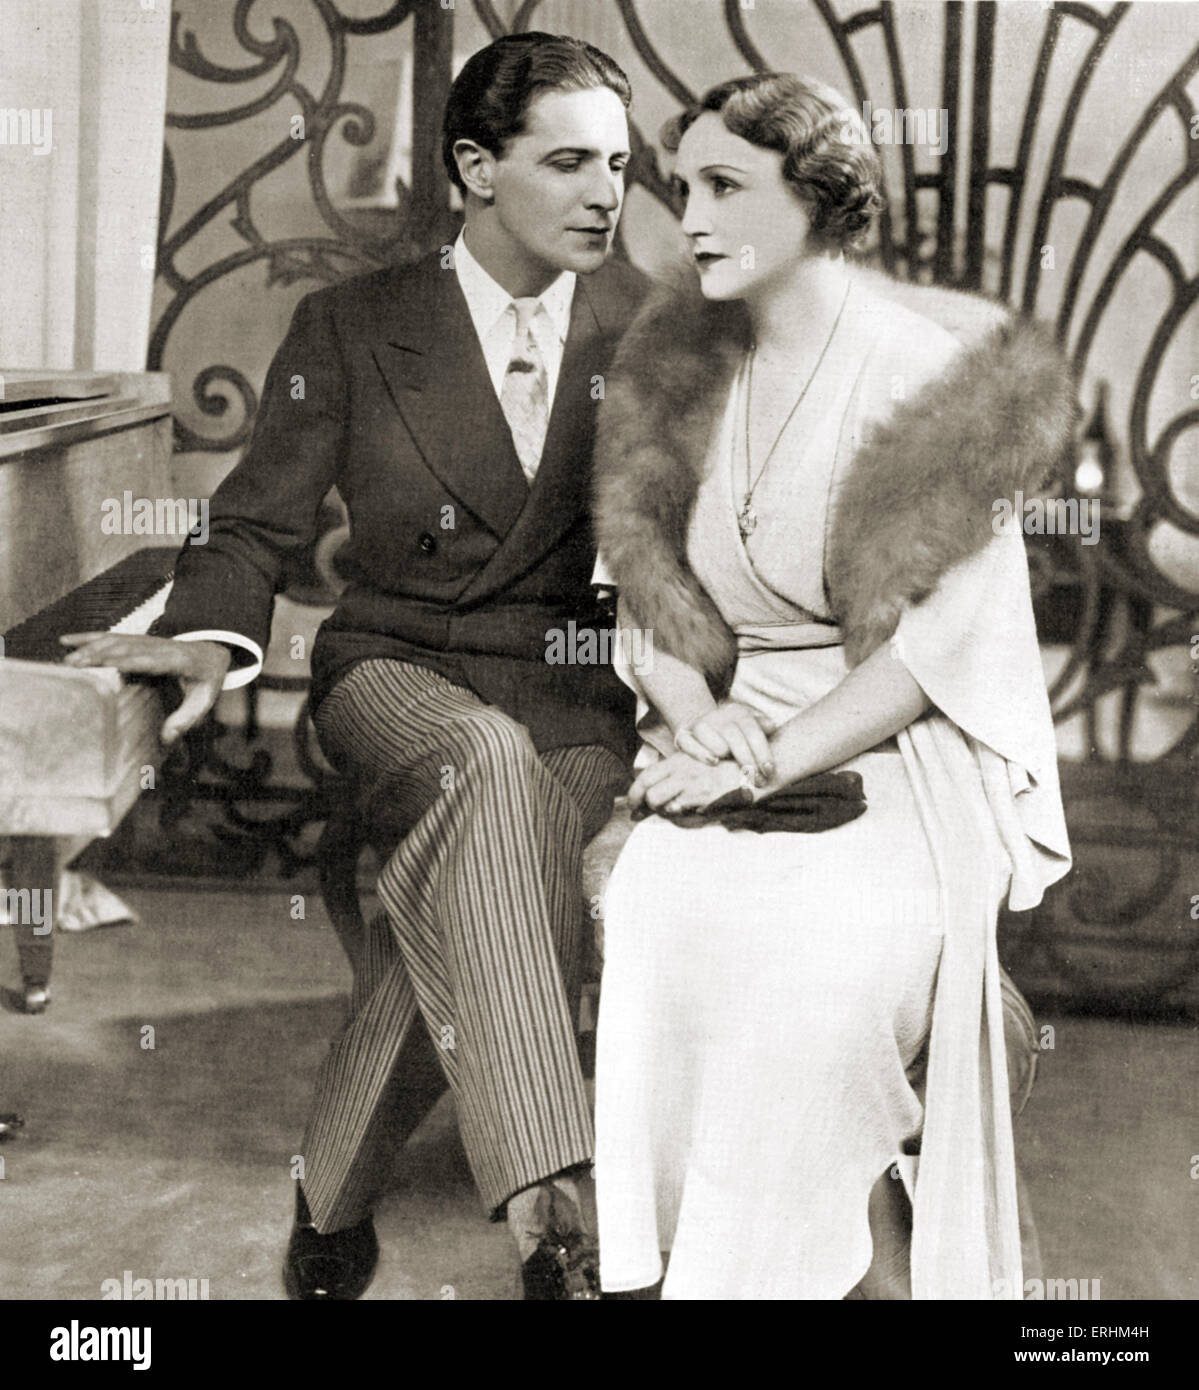 Ivor Novello as 'Jacques Clavel' & Fay Compton as 'Mary Ventyre' in Novello 's play 'Murder in Mayfair', performed at the Globe Stock Photo